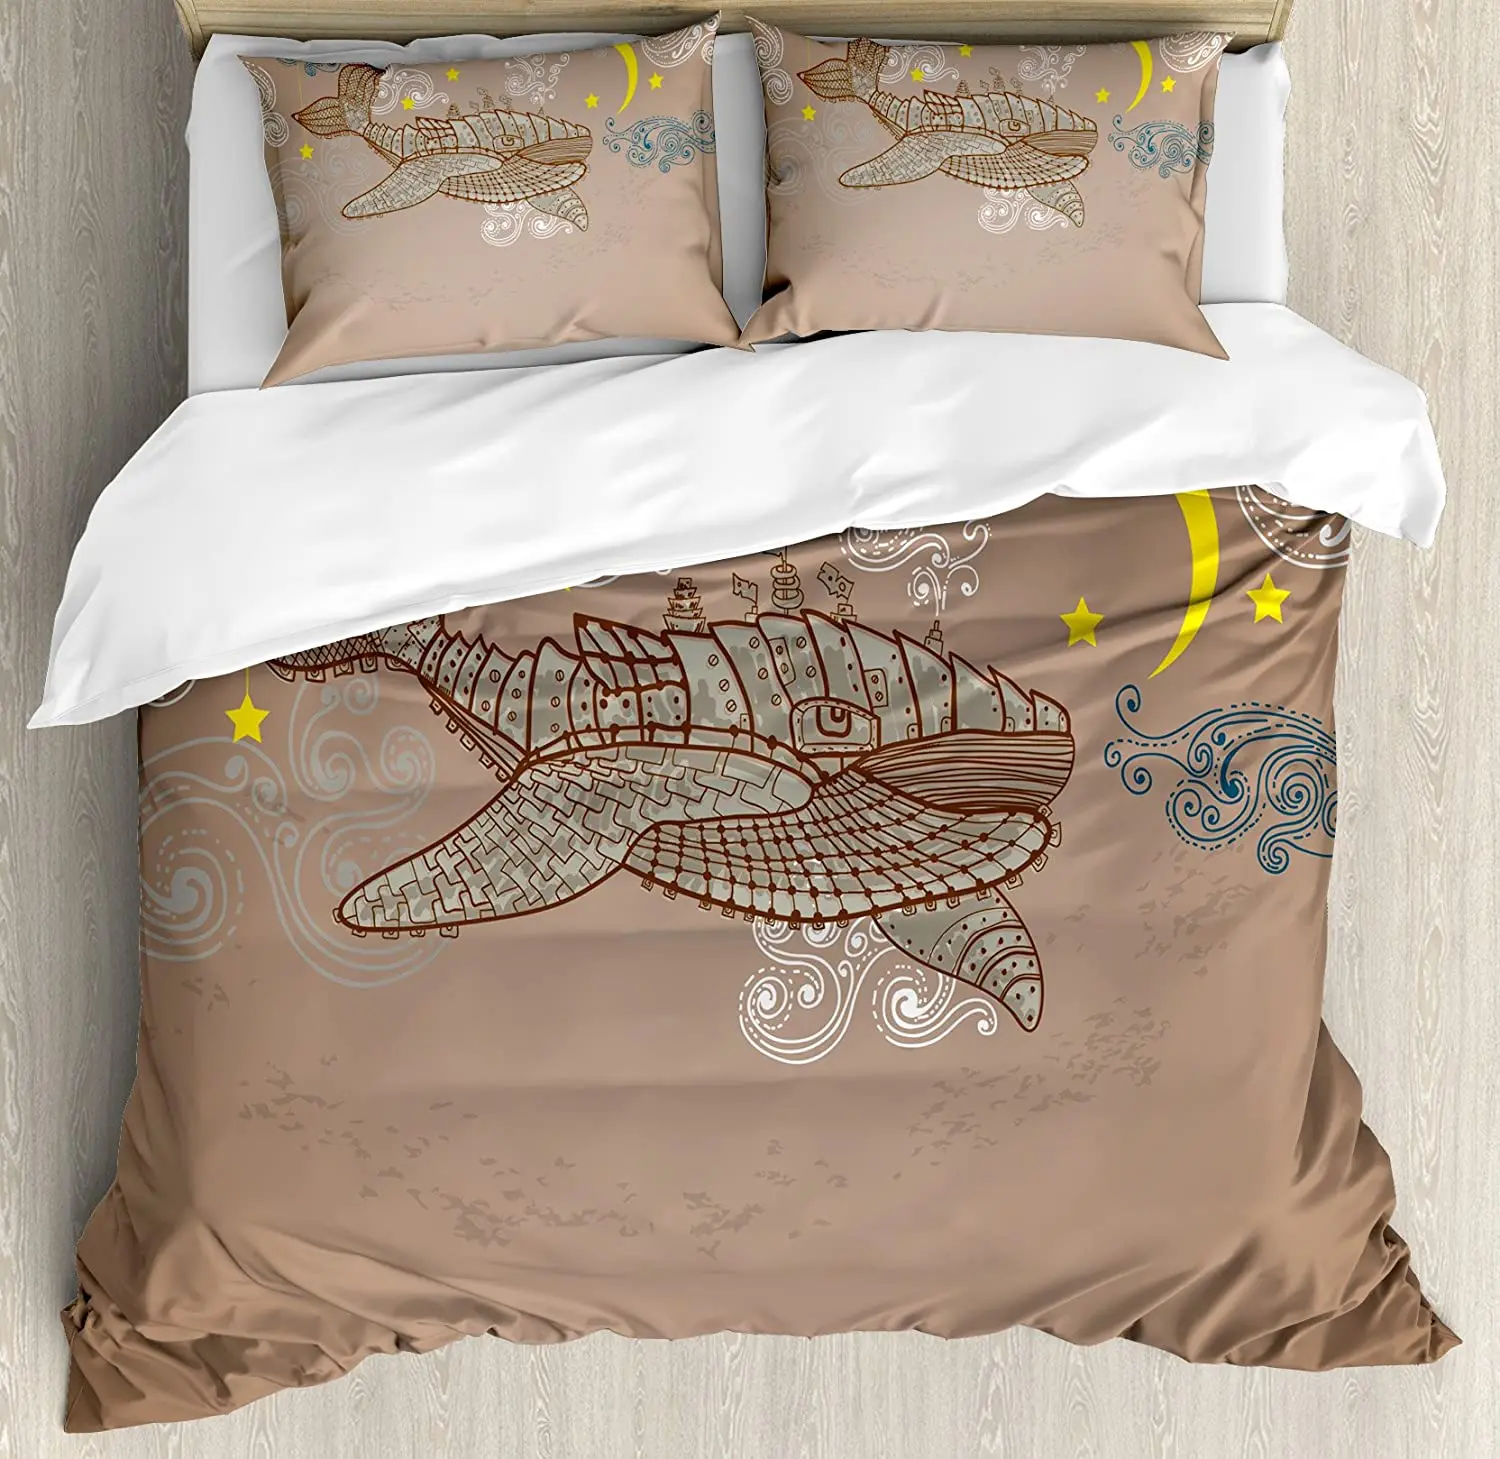 

Whale Bedding Set For Bedroom Bed Home Steampunk Whale Flying in the Air with Moons and St Duvet Cover Quilt Cover Pillowcase